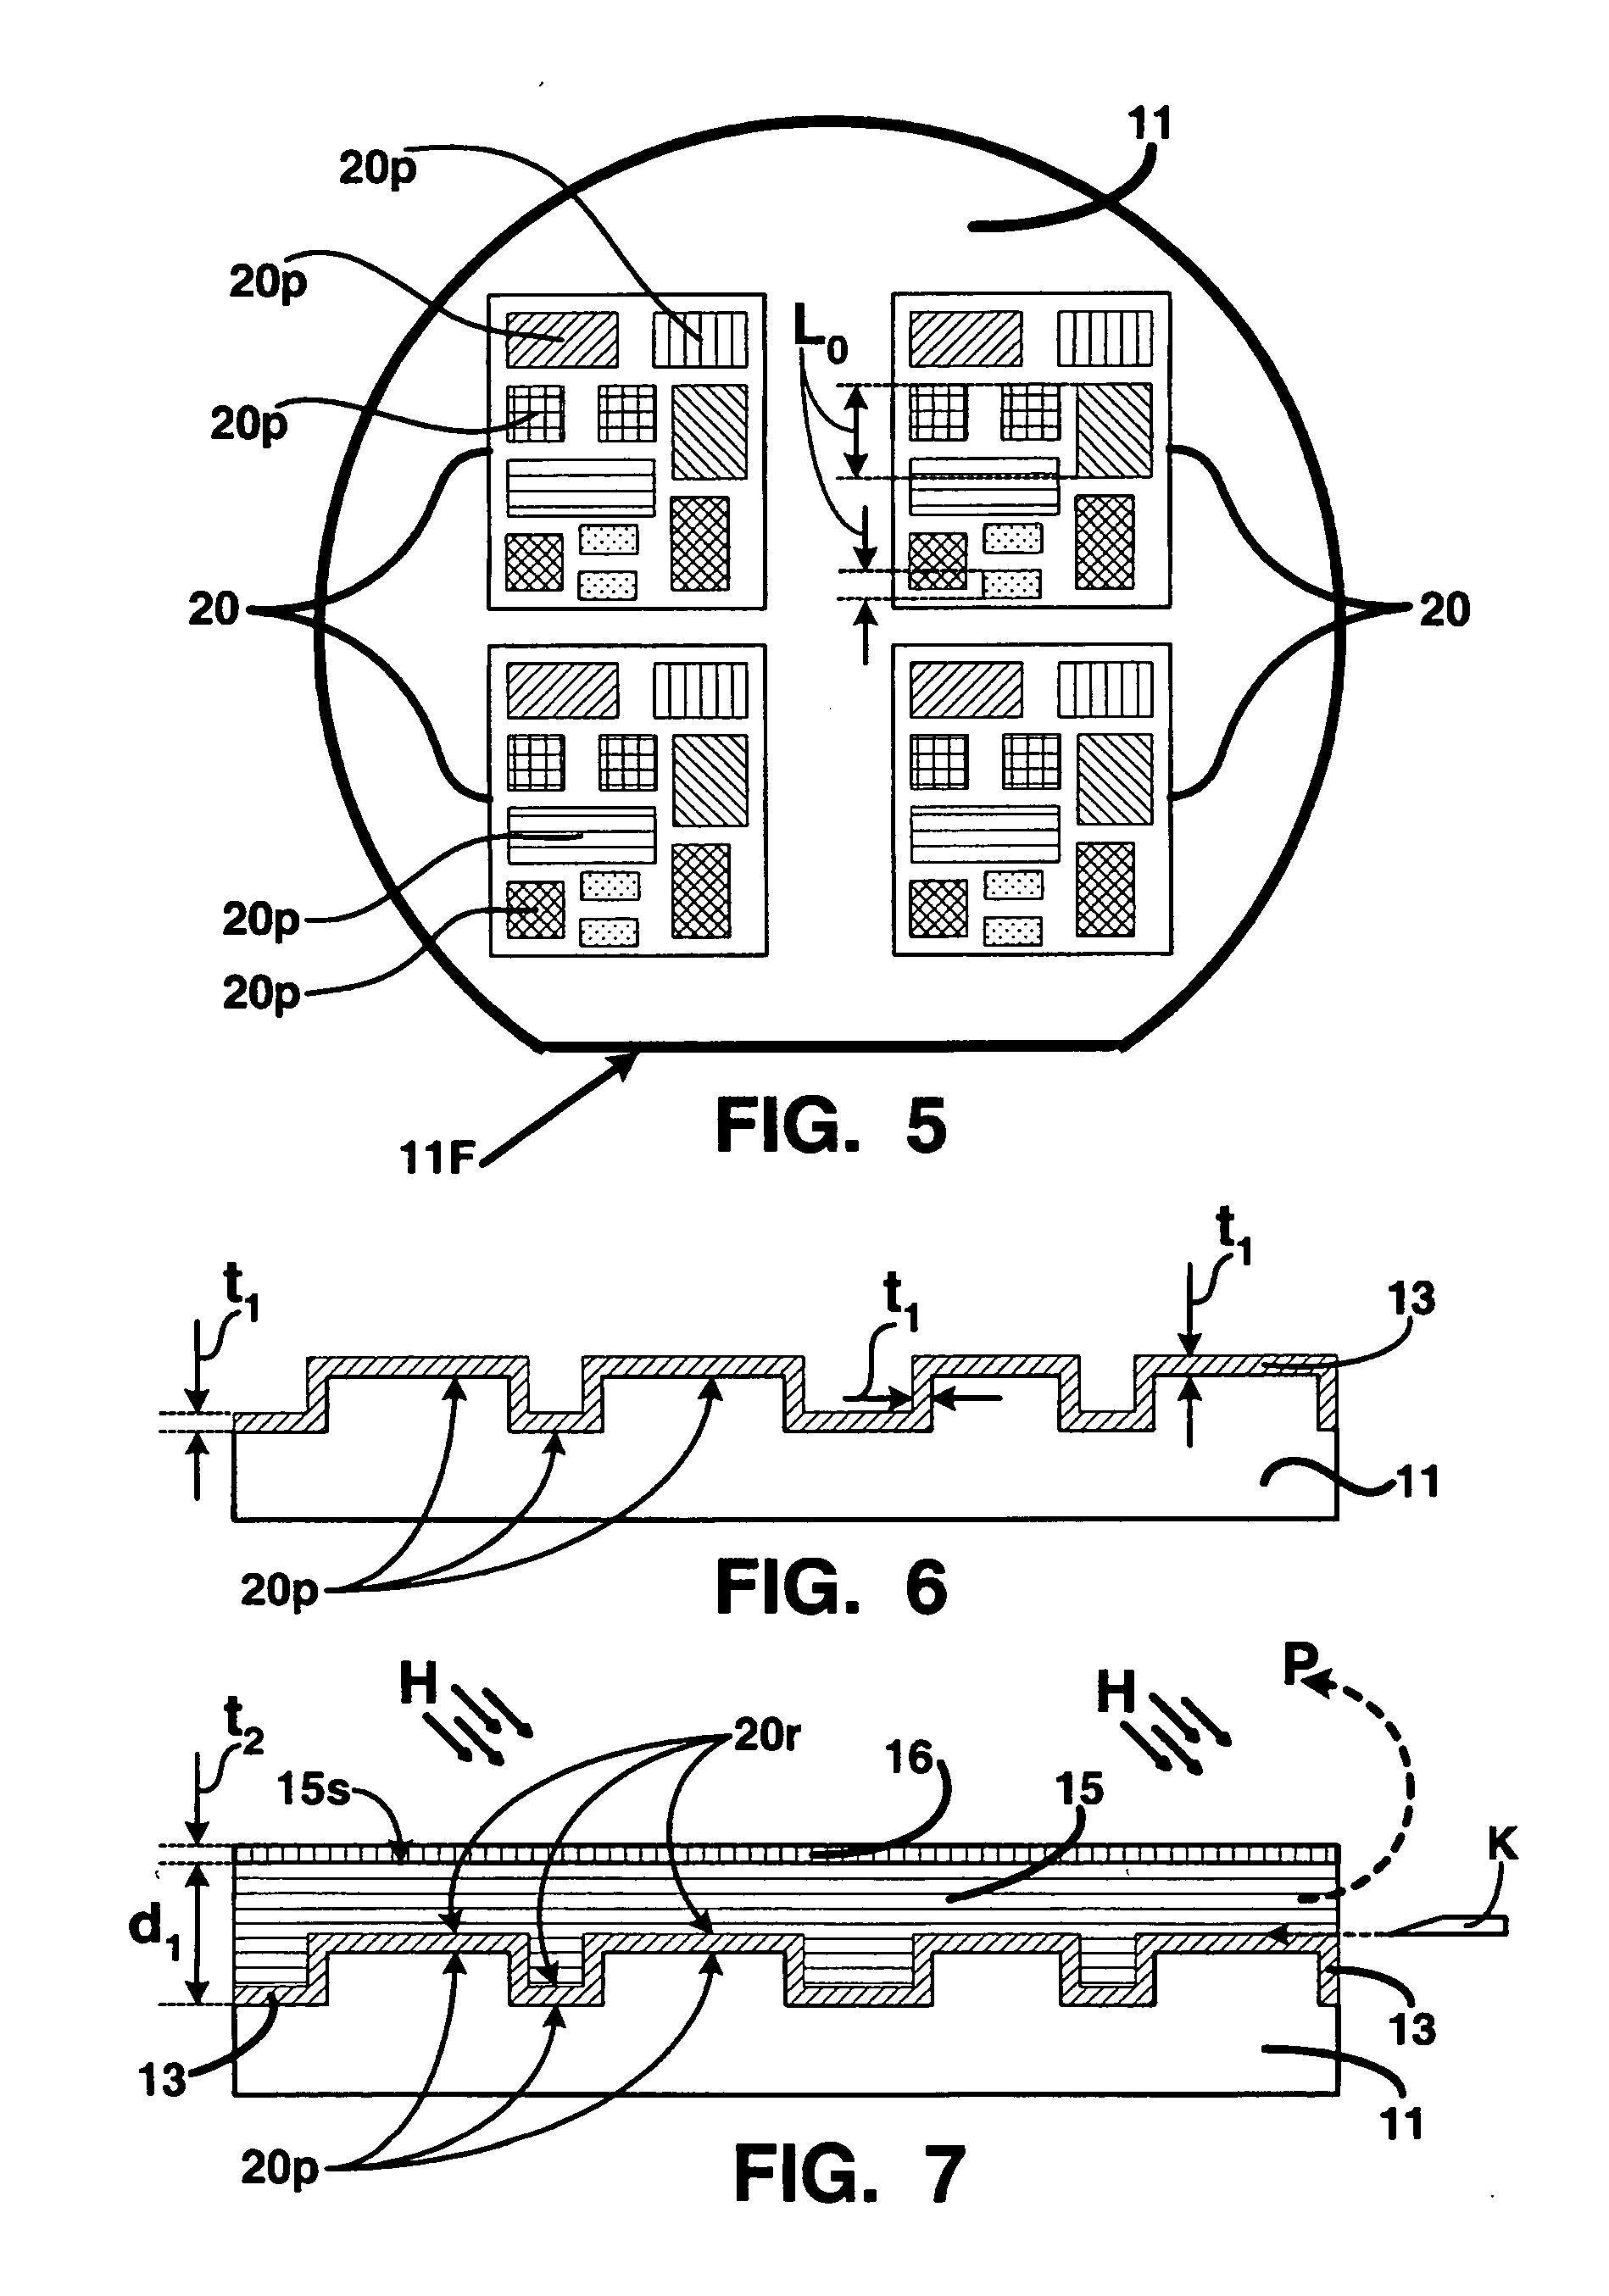 Apparatus for embossing a flexible substrate with a pattern carried by an optically transparent compliant media